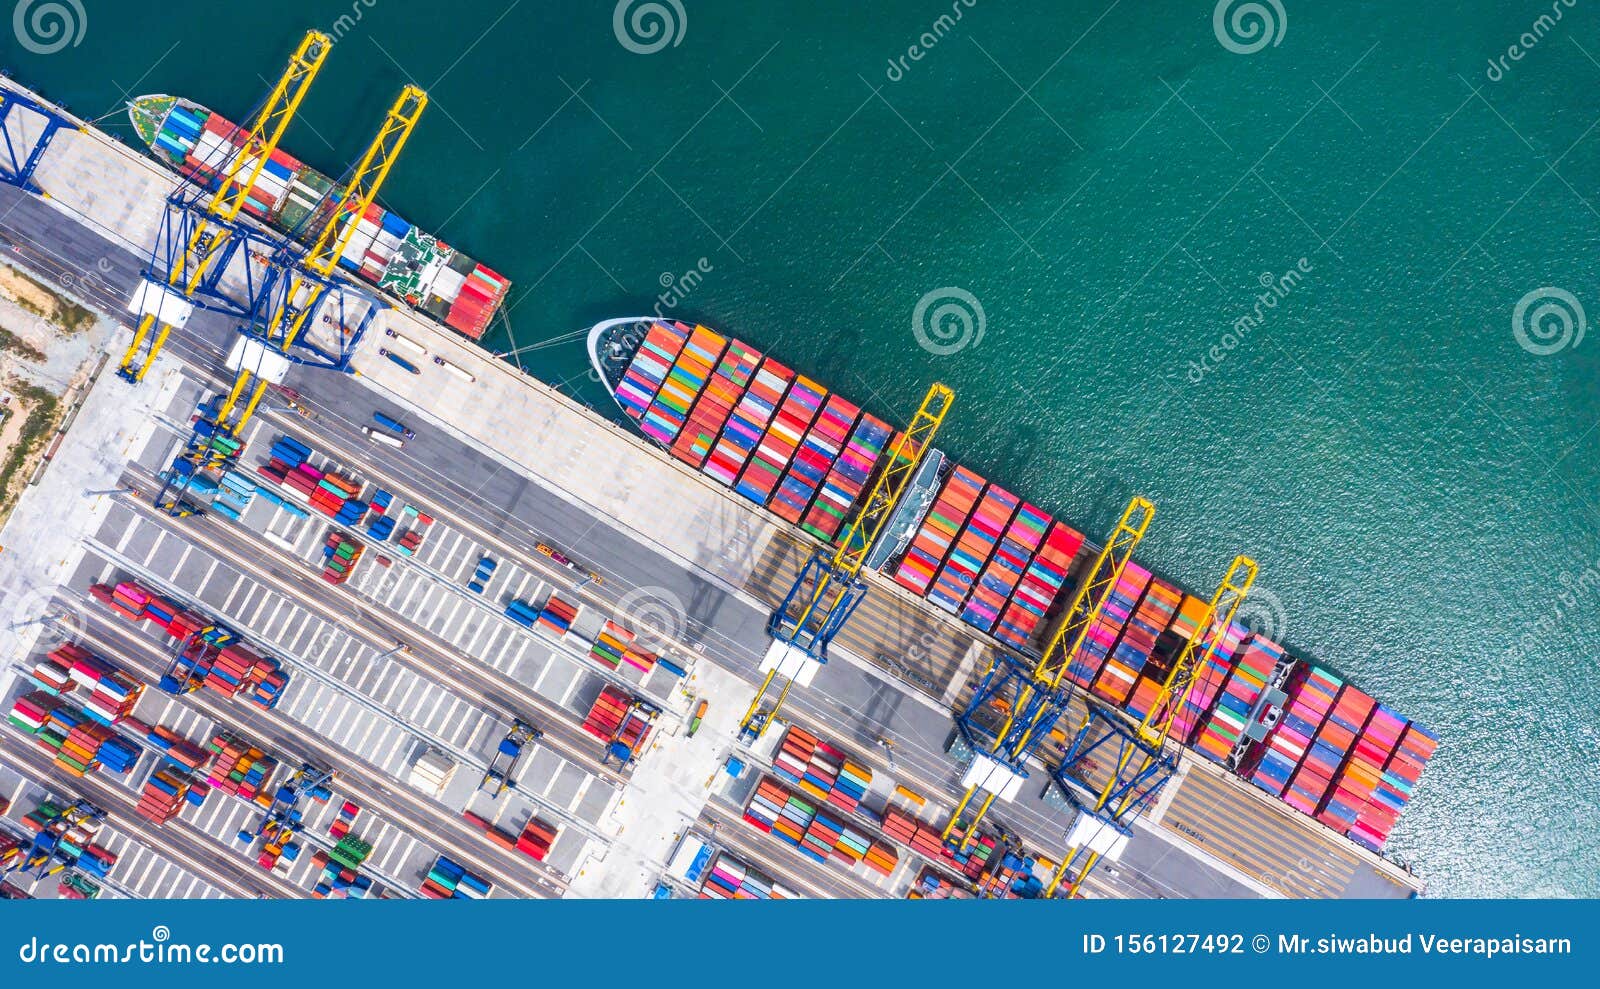 container ship loading and unloading in deep sea port, aerial top view of business logistic import and  export freight